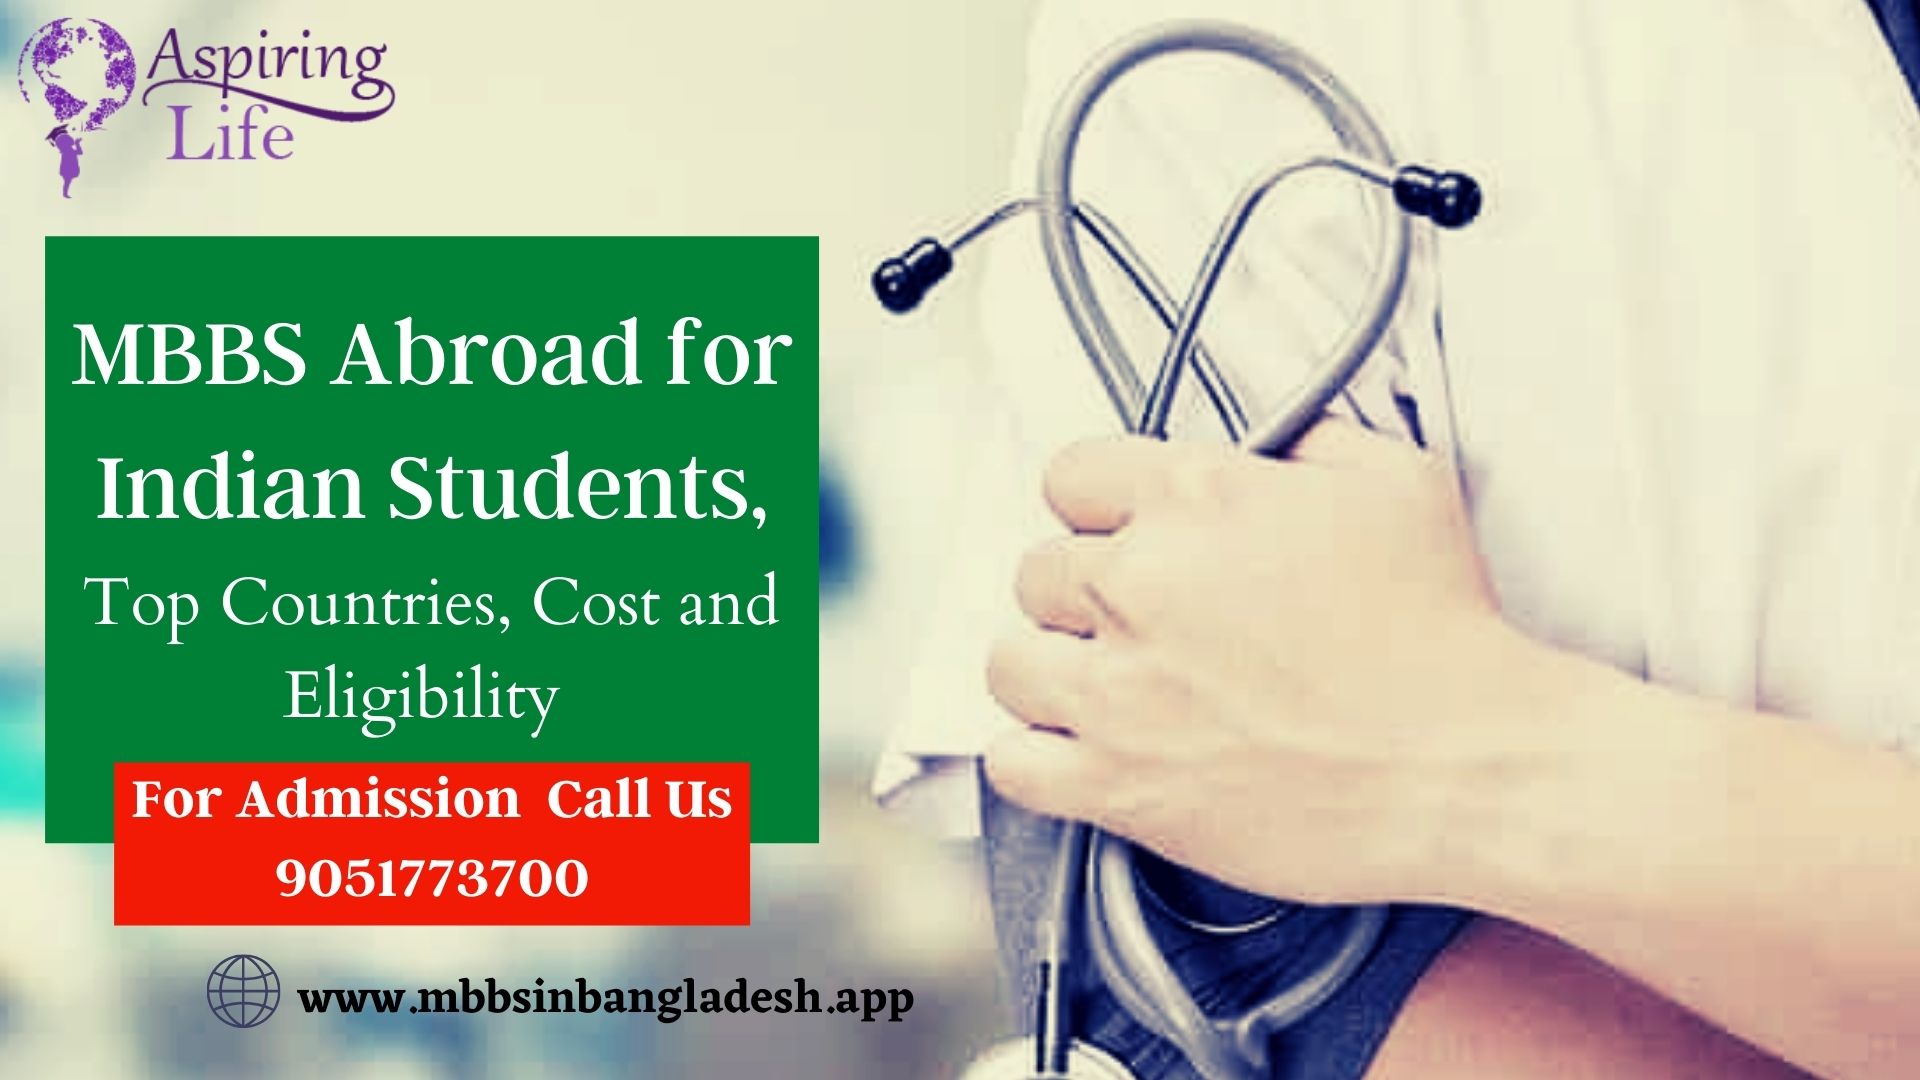 MBBS Abroad for Indian Students, Top Countries, Cost and Eligibility